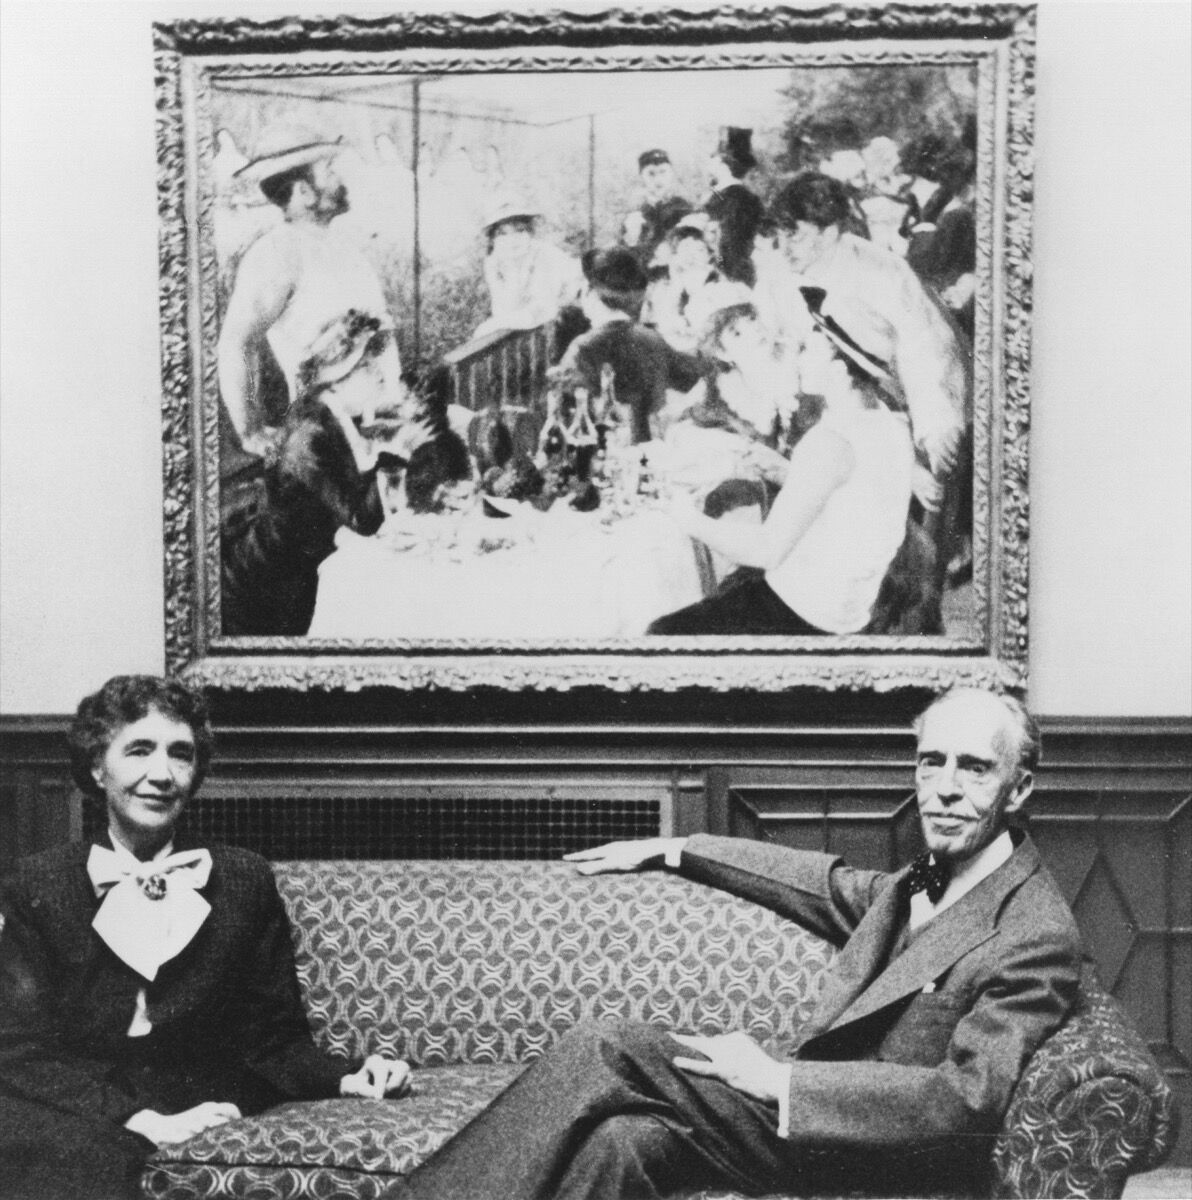 Marjorie and Duncan Phillips in front of Pierre-Auguste Renoir’s Luncheon of the Boating Party , 1880–81, ca. 1954. Photo by Naomi Savage. Courtesy of the Phillips Collection, Washington D.C.